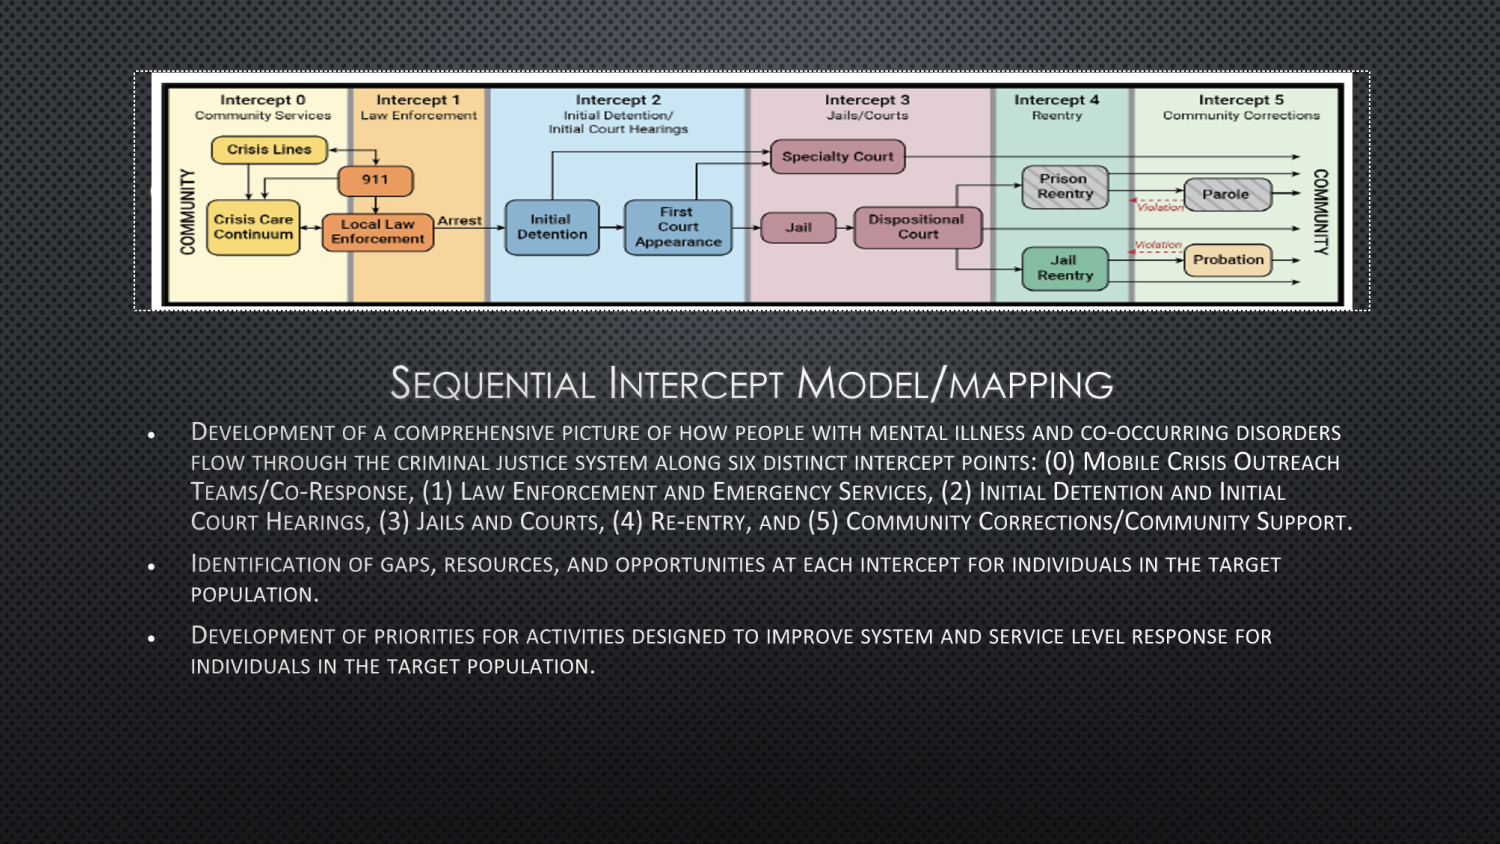 Sequential Intercept Model/Mapping